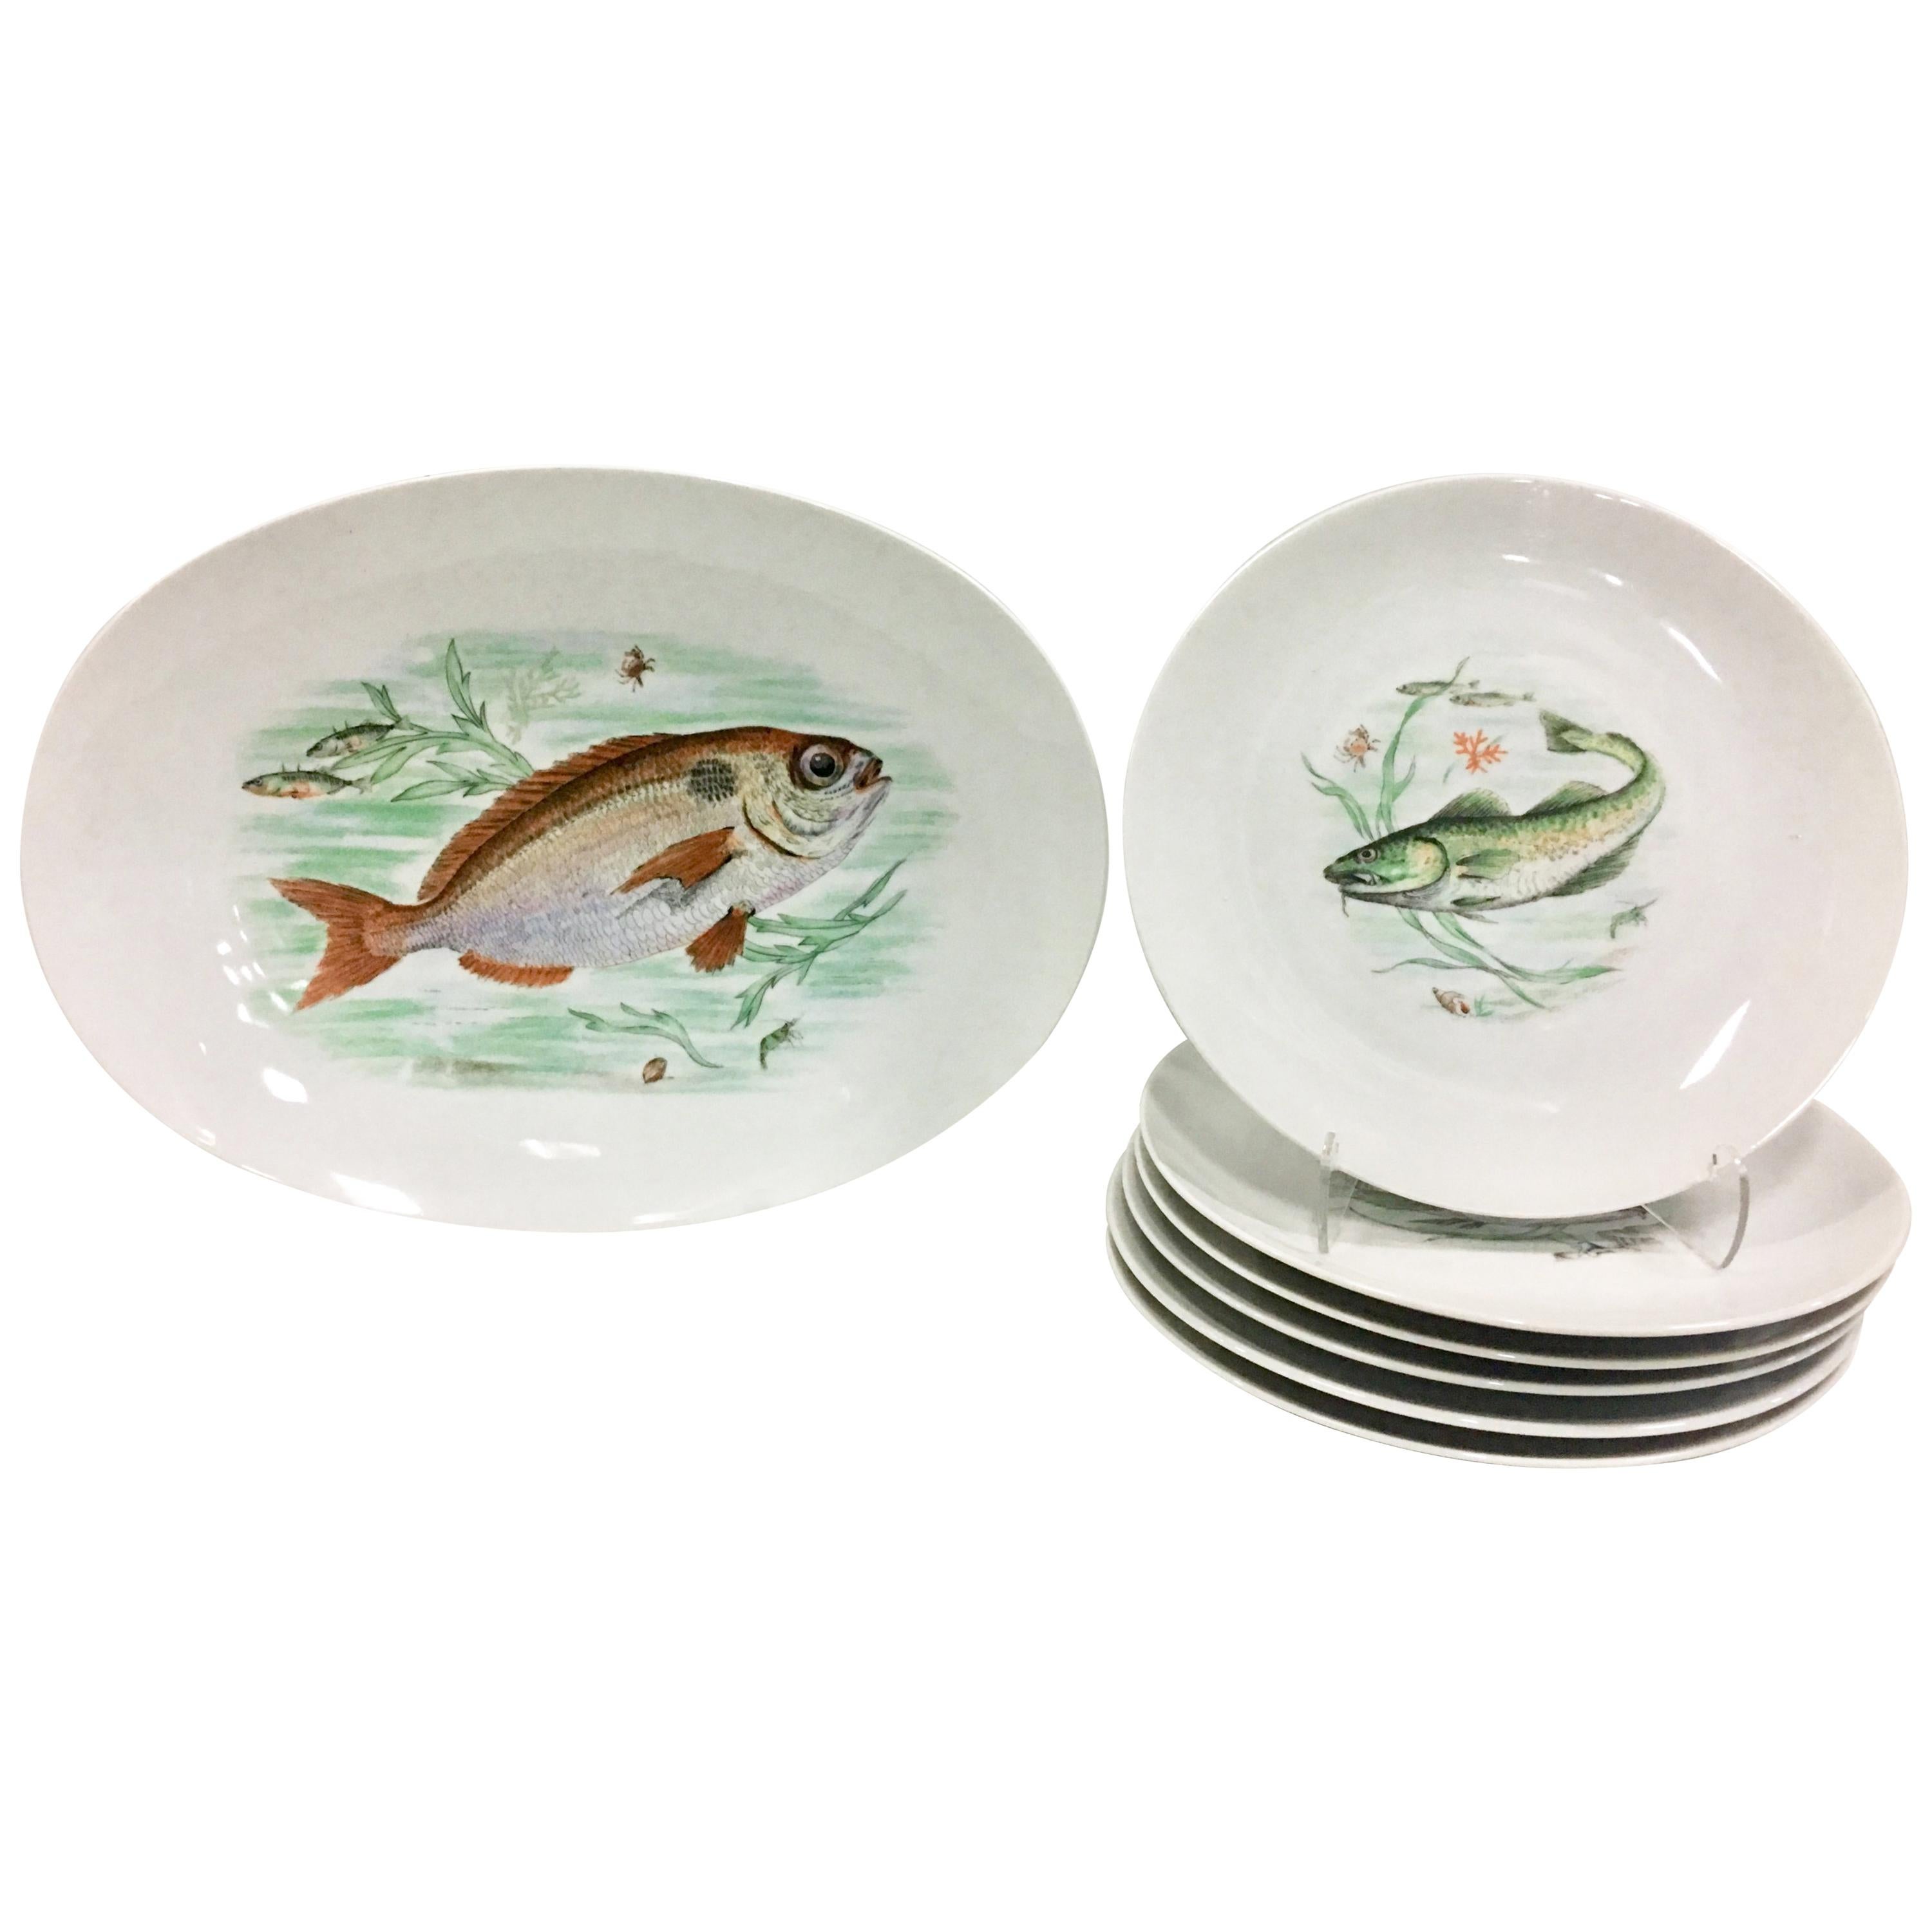 Mid-Century German Porcelain Hand-Painted Fish Service Set Of 7 By, JKW